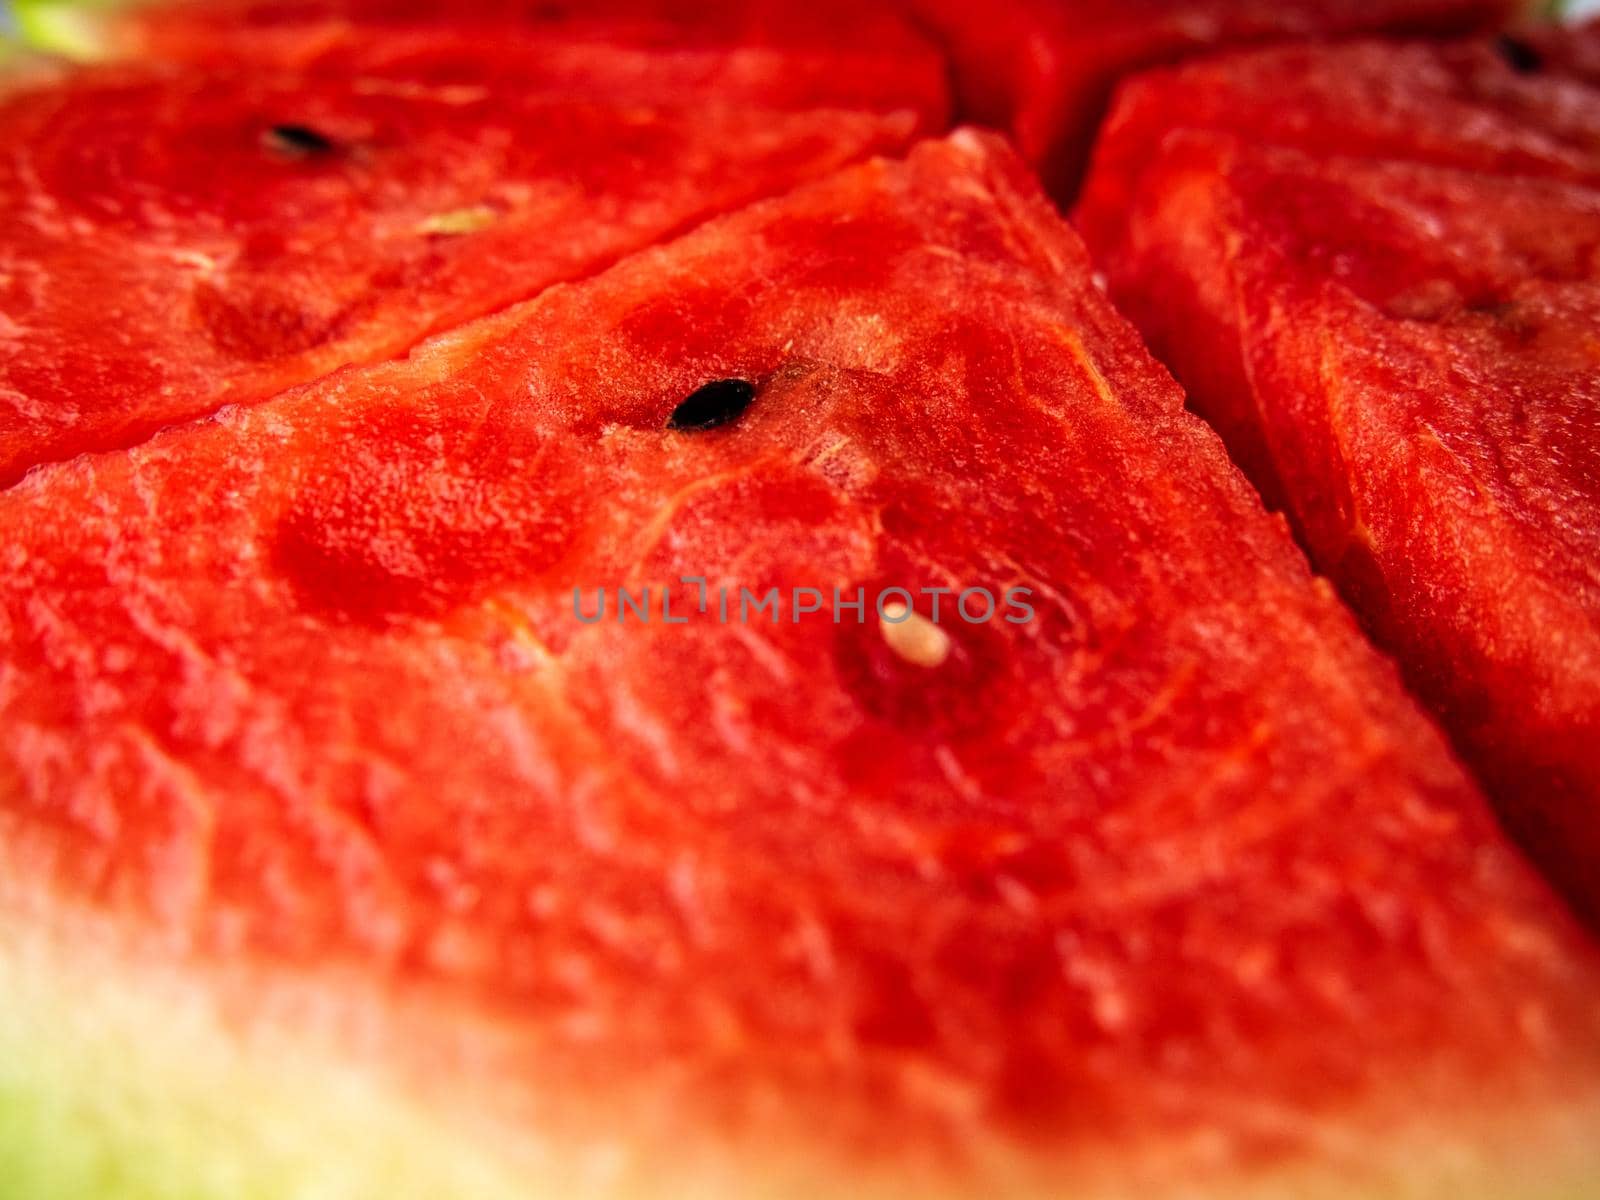 Slice of ripe and juicy watermelon, close-up. triangular slices of fresh watermelon with seeds.